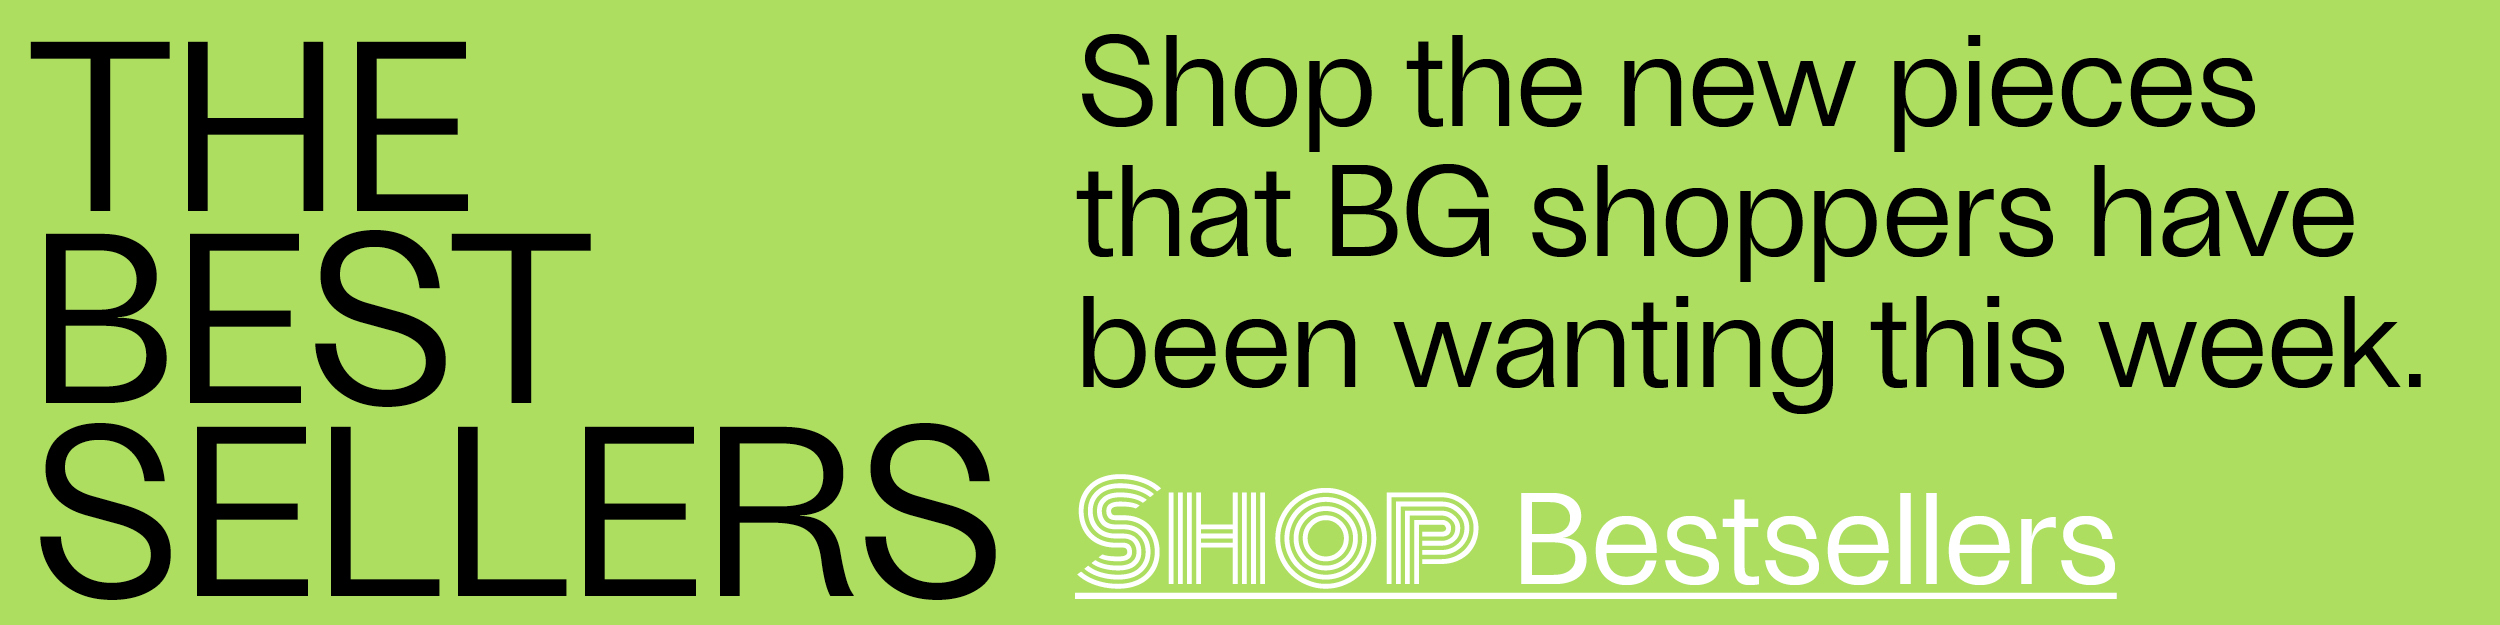 The Bestsellers - Shop the new pieces that BG Shoppers have been wanting this week. - Shop Bestsellers